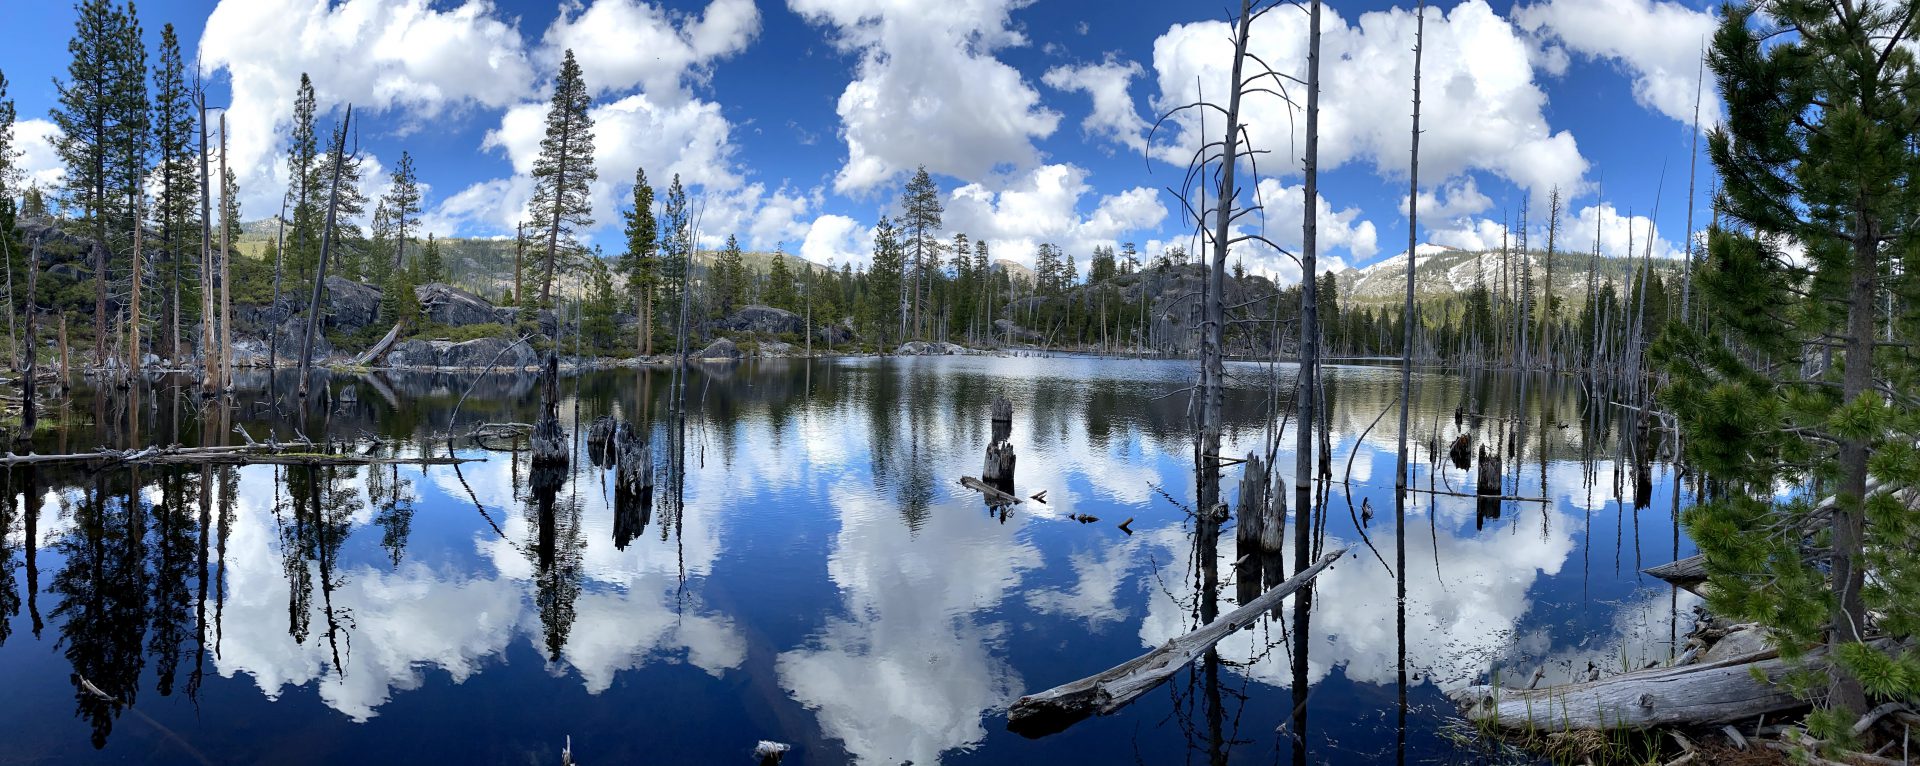 A lake with trees and clouds in the sky.